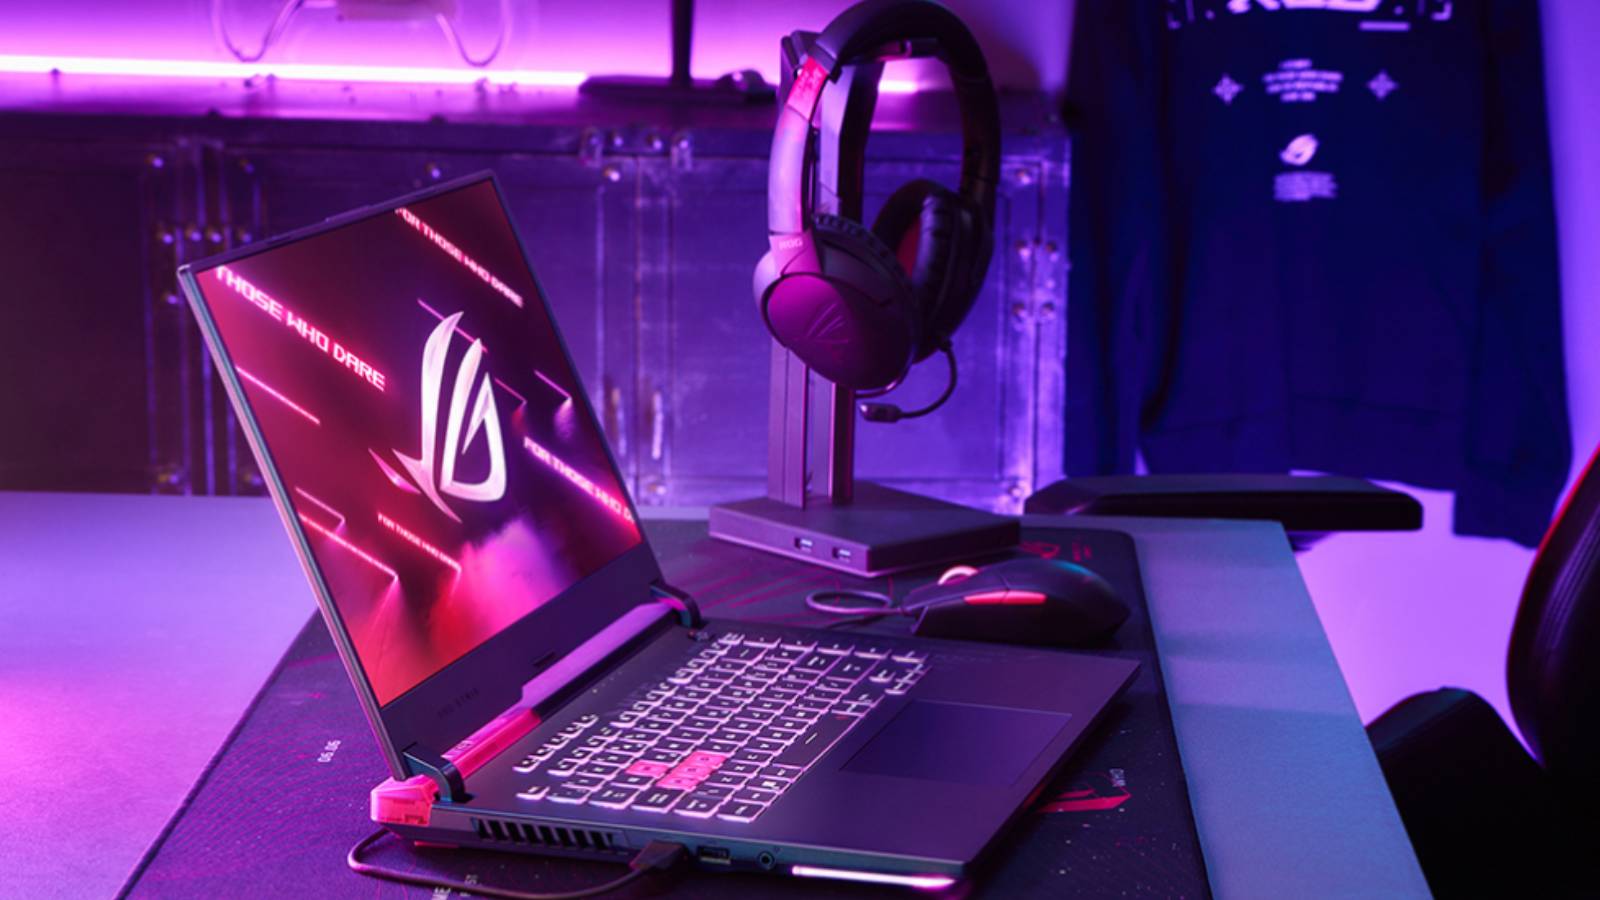 Image of the ASUS ROG Strix G15 Gaming Laptop, on a desk with a pink and purple background.